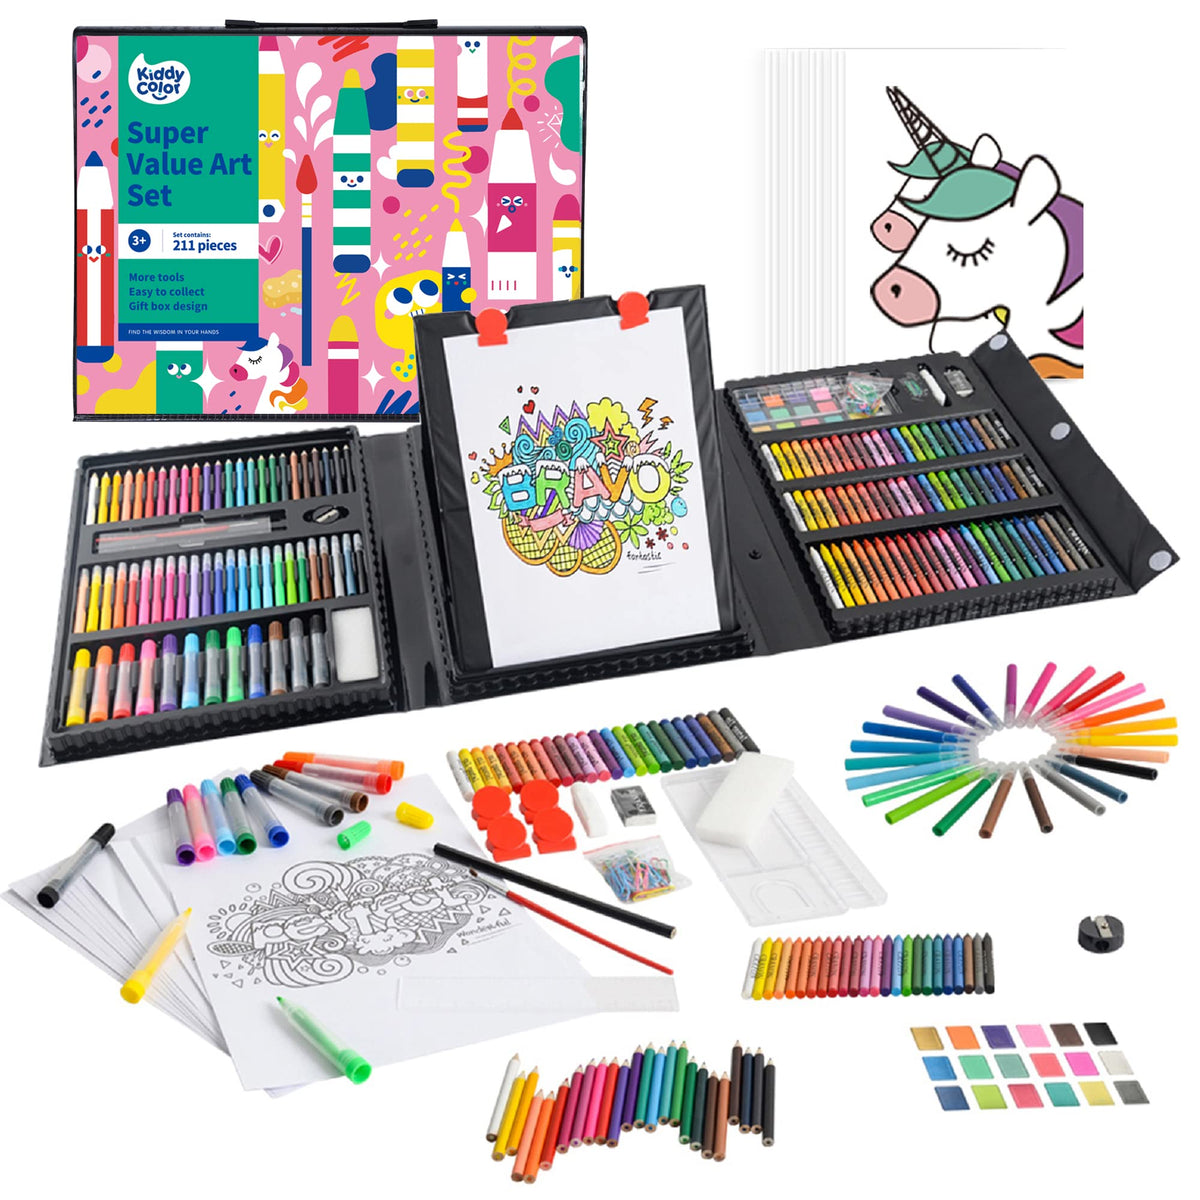  POPYOLA Acrylic Paint Set for Kids with Portable Gift